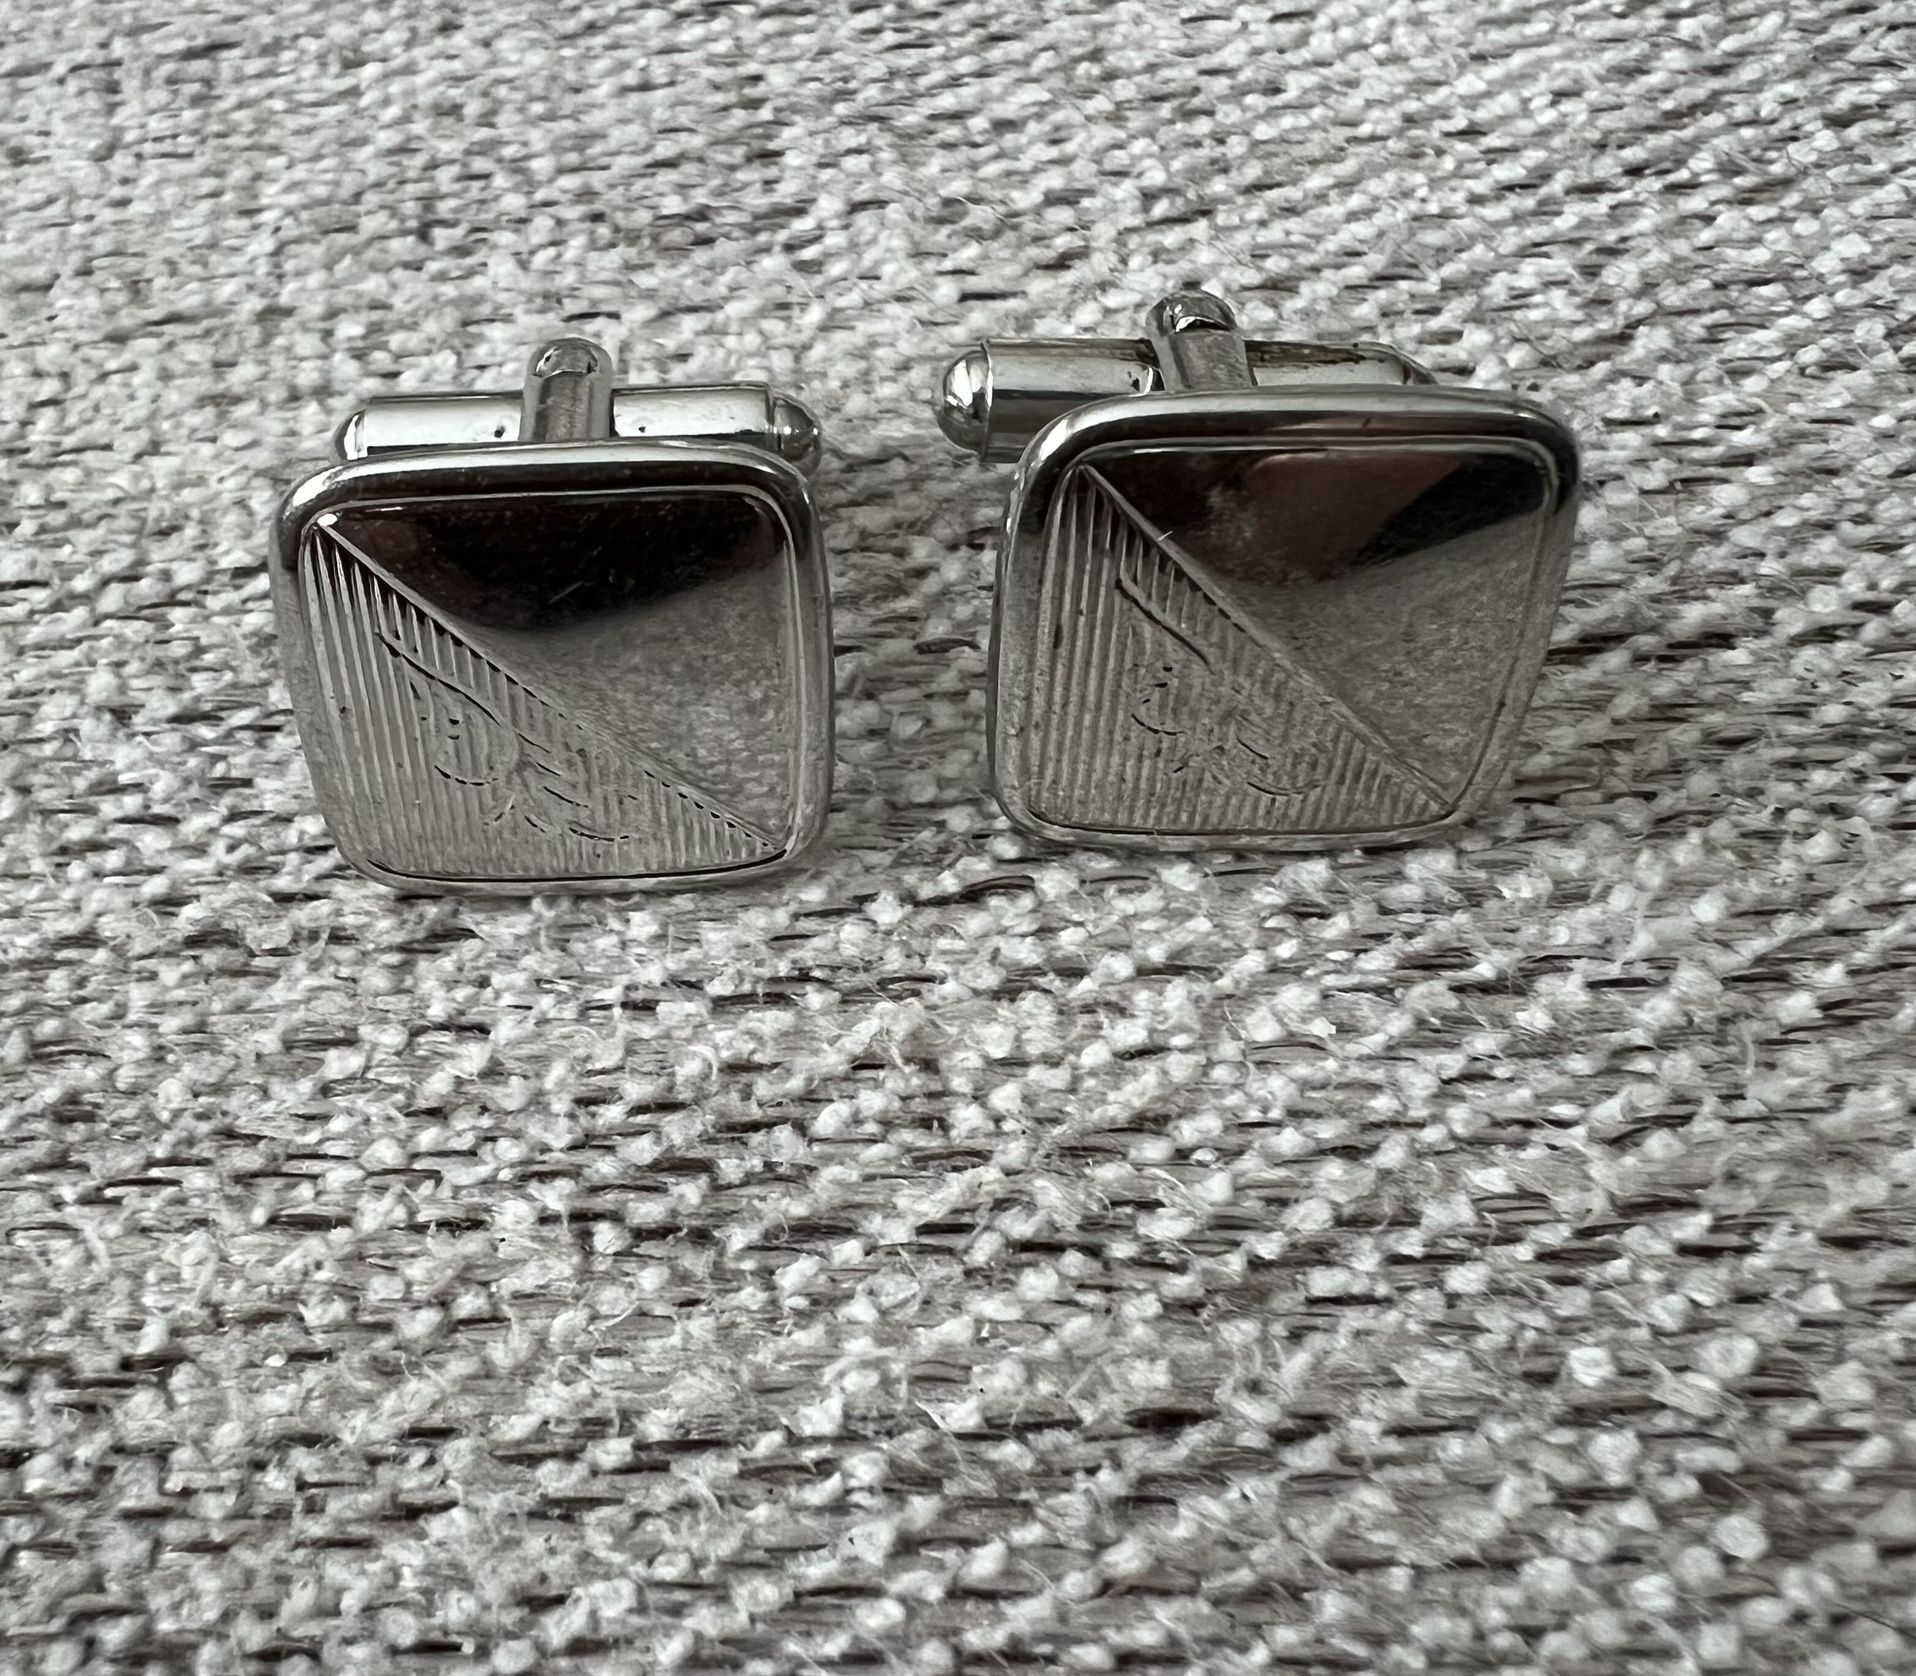 Vintage Cuff Links, Silver Tone Metal, Square Shape, Nicely Detailed